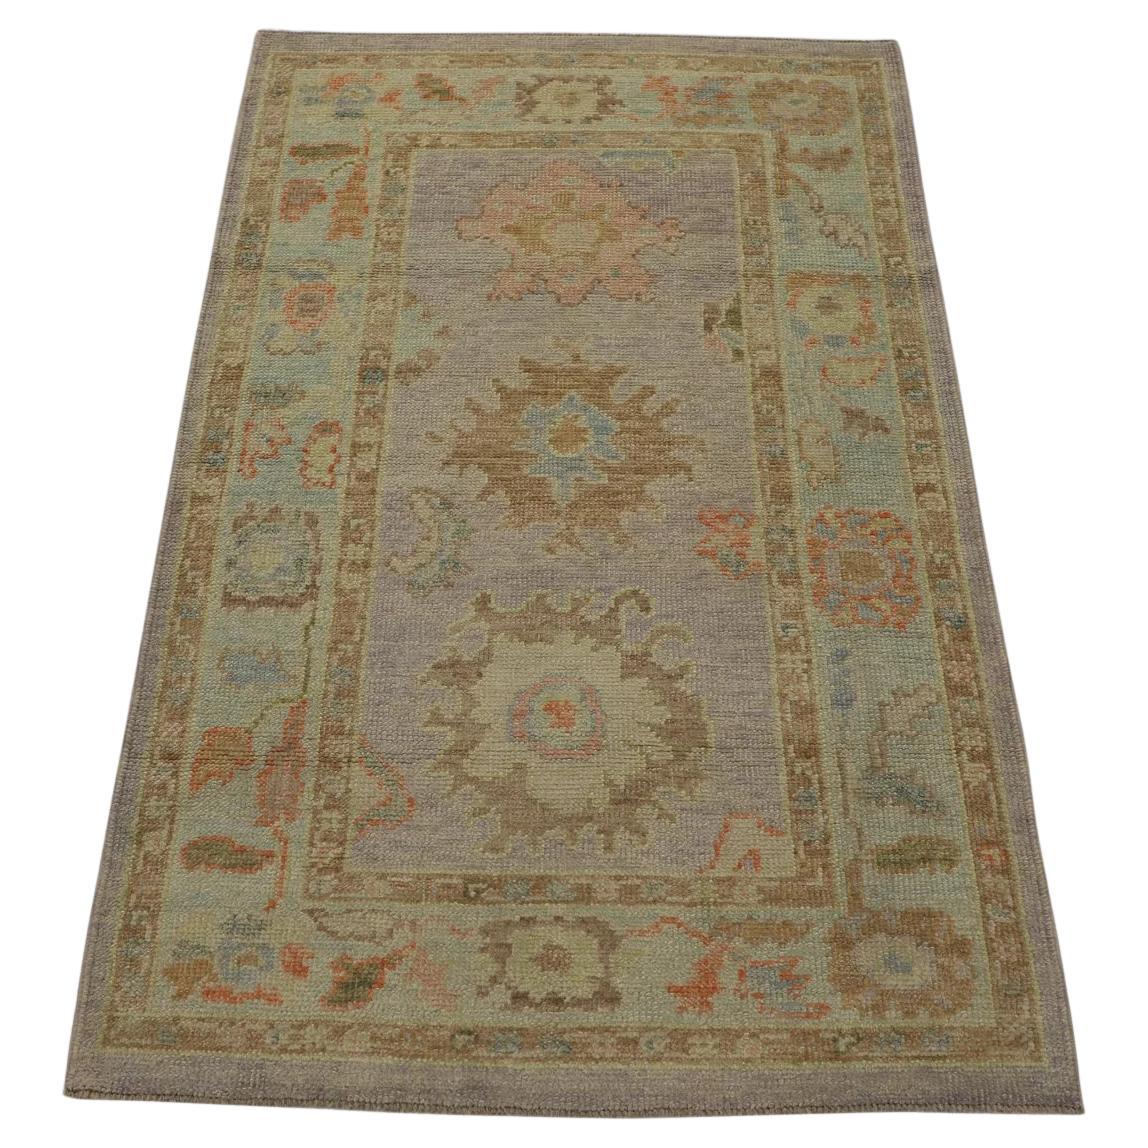 Oriental Hand Knotted Turkish Oushak Rug 3' x 4'8" #2312